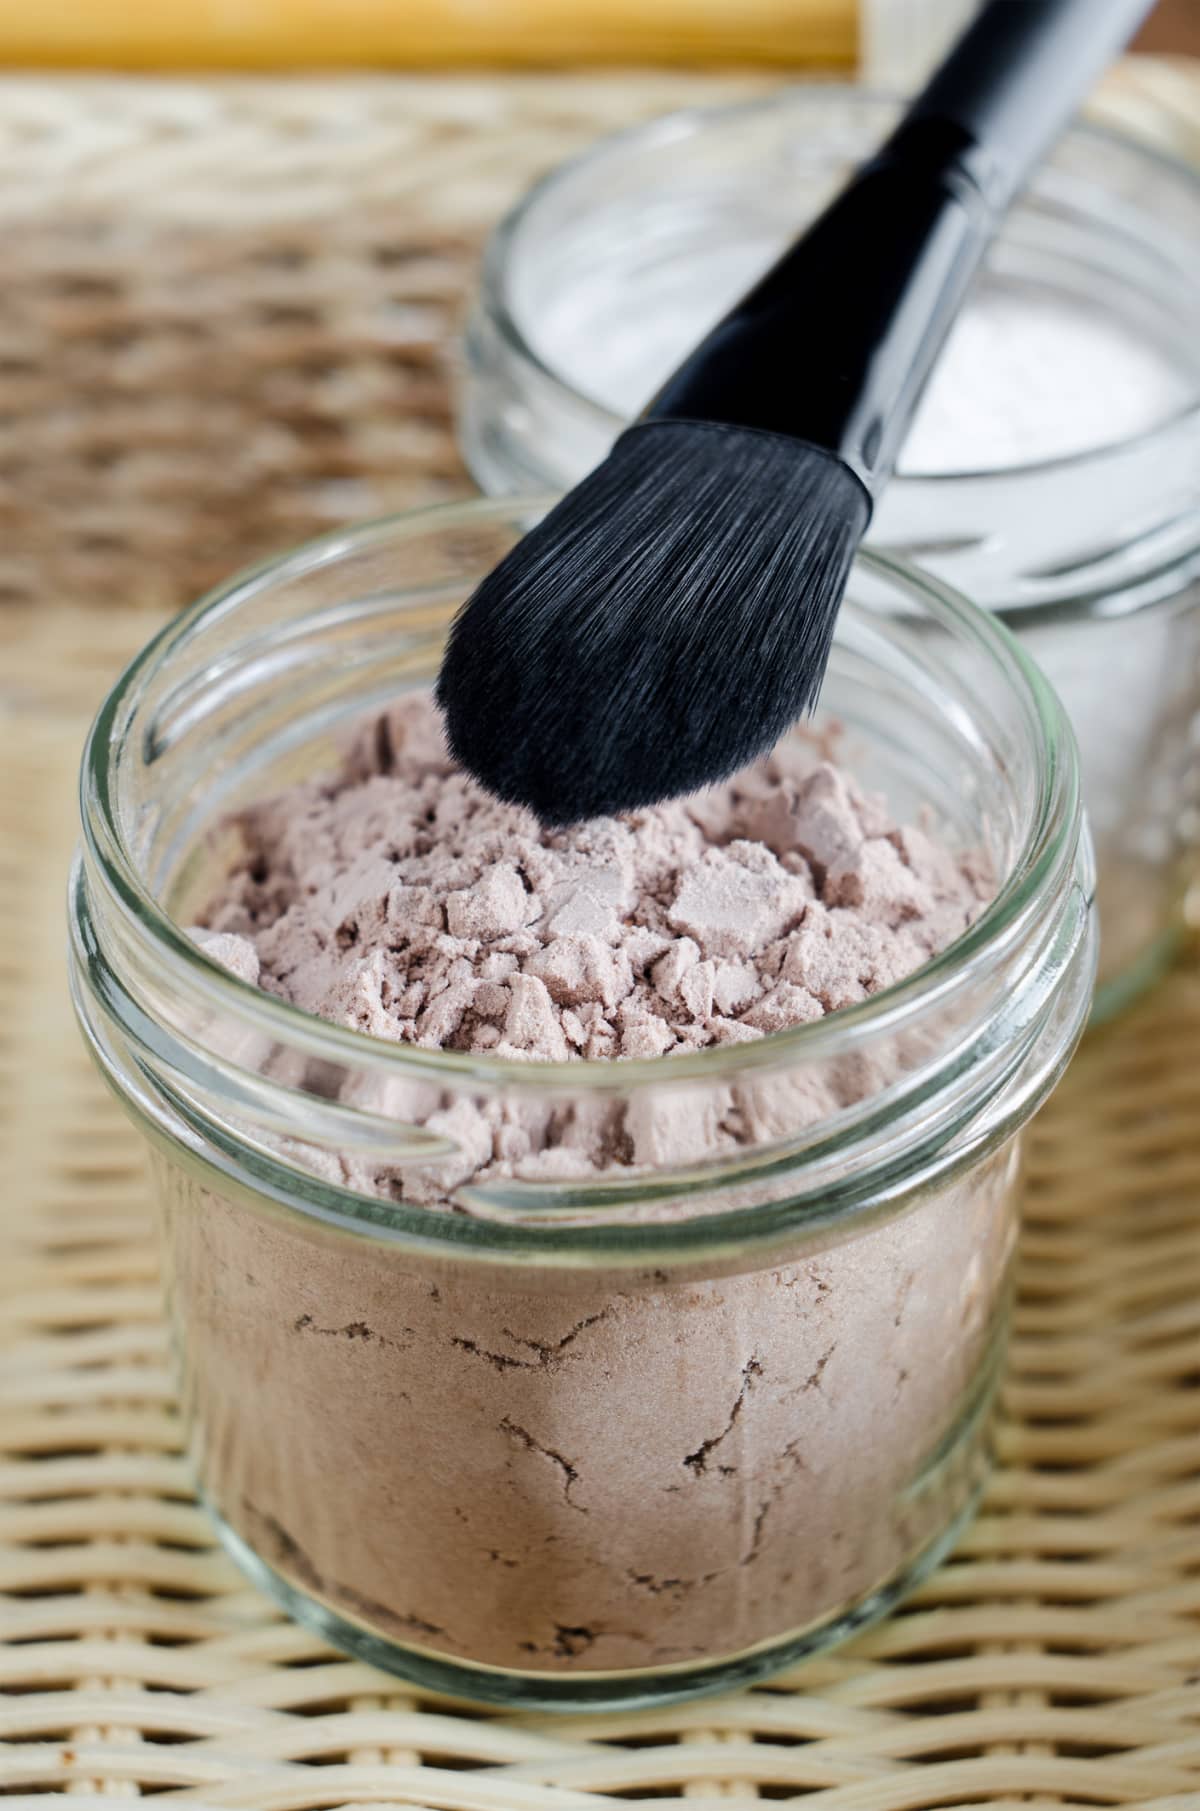 Mineral homemade powder foundation or dry shampoo in a grass jar. DIY cosmetics. Close up, copy space.